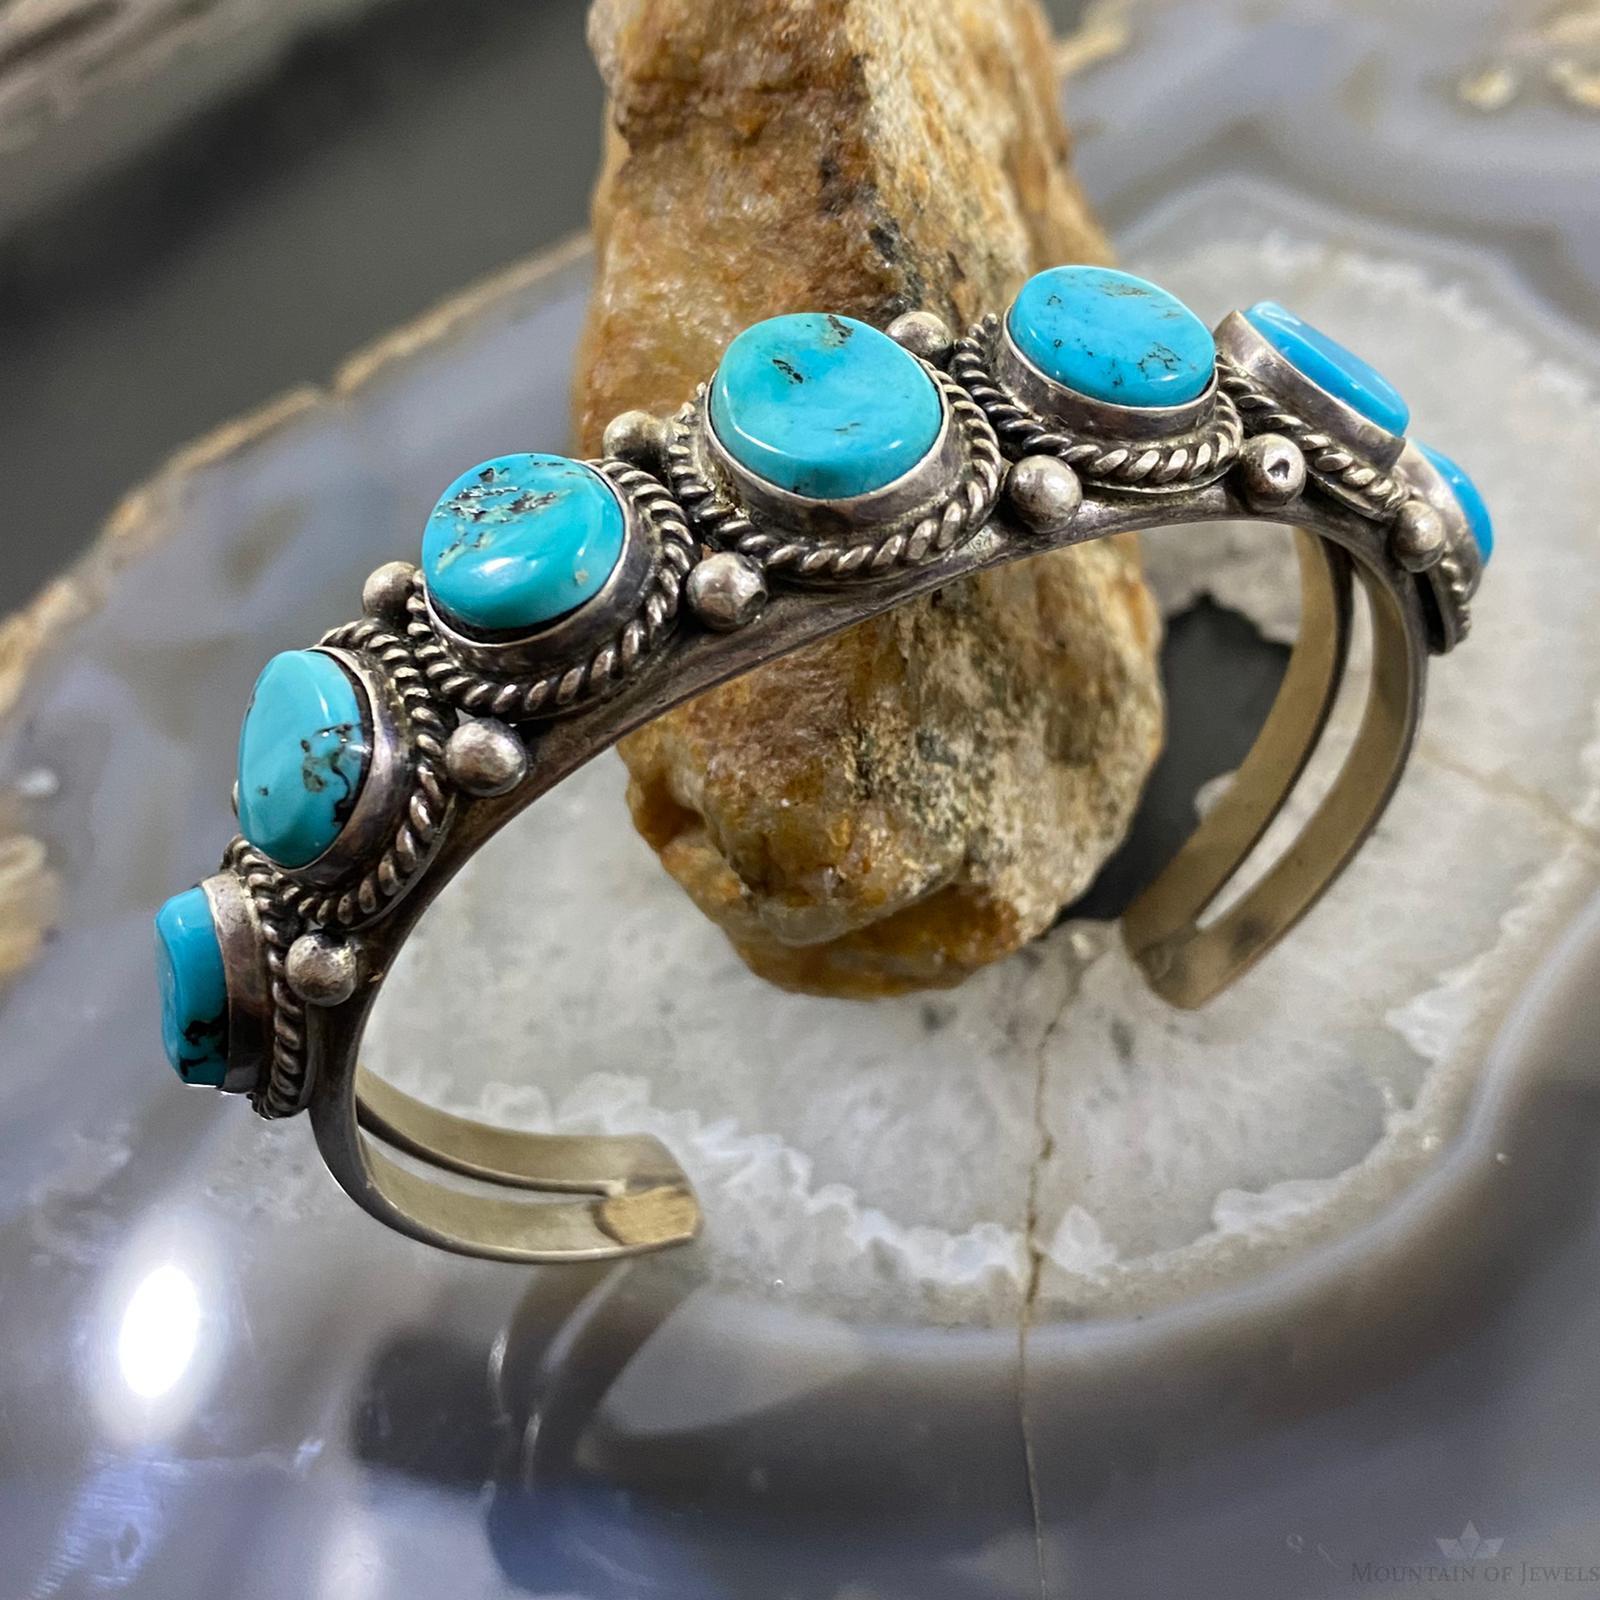 Collection Of Native American Turquoise And Silver Jewelry Stock Photo -  Download Image Now - iStock